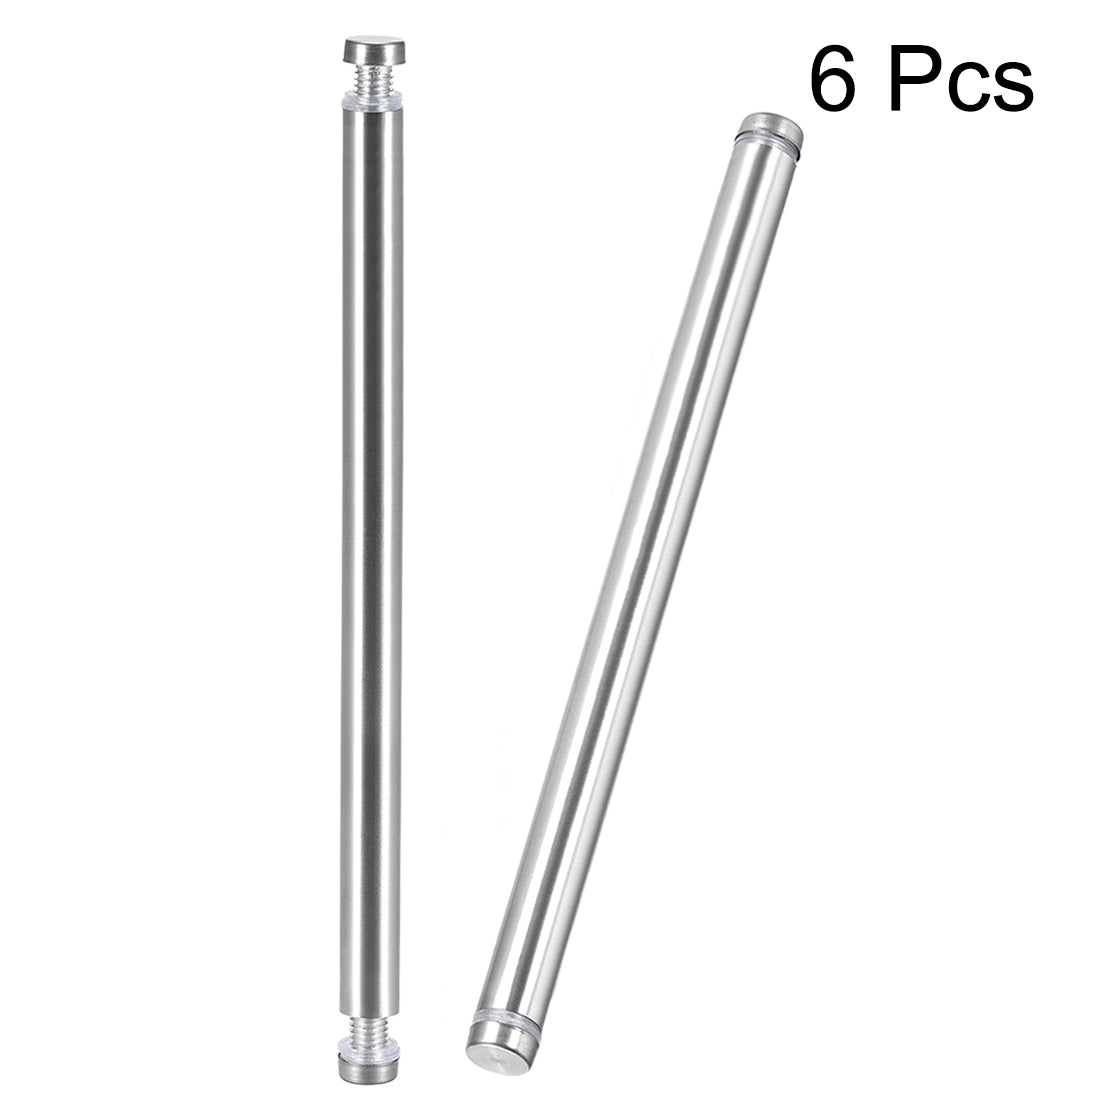 uxcell Uxcell Glass Standoff Double Head Stainless Steel Standoff Holder 12mm x 204mm 6 Pcs